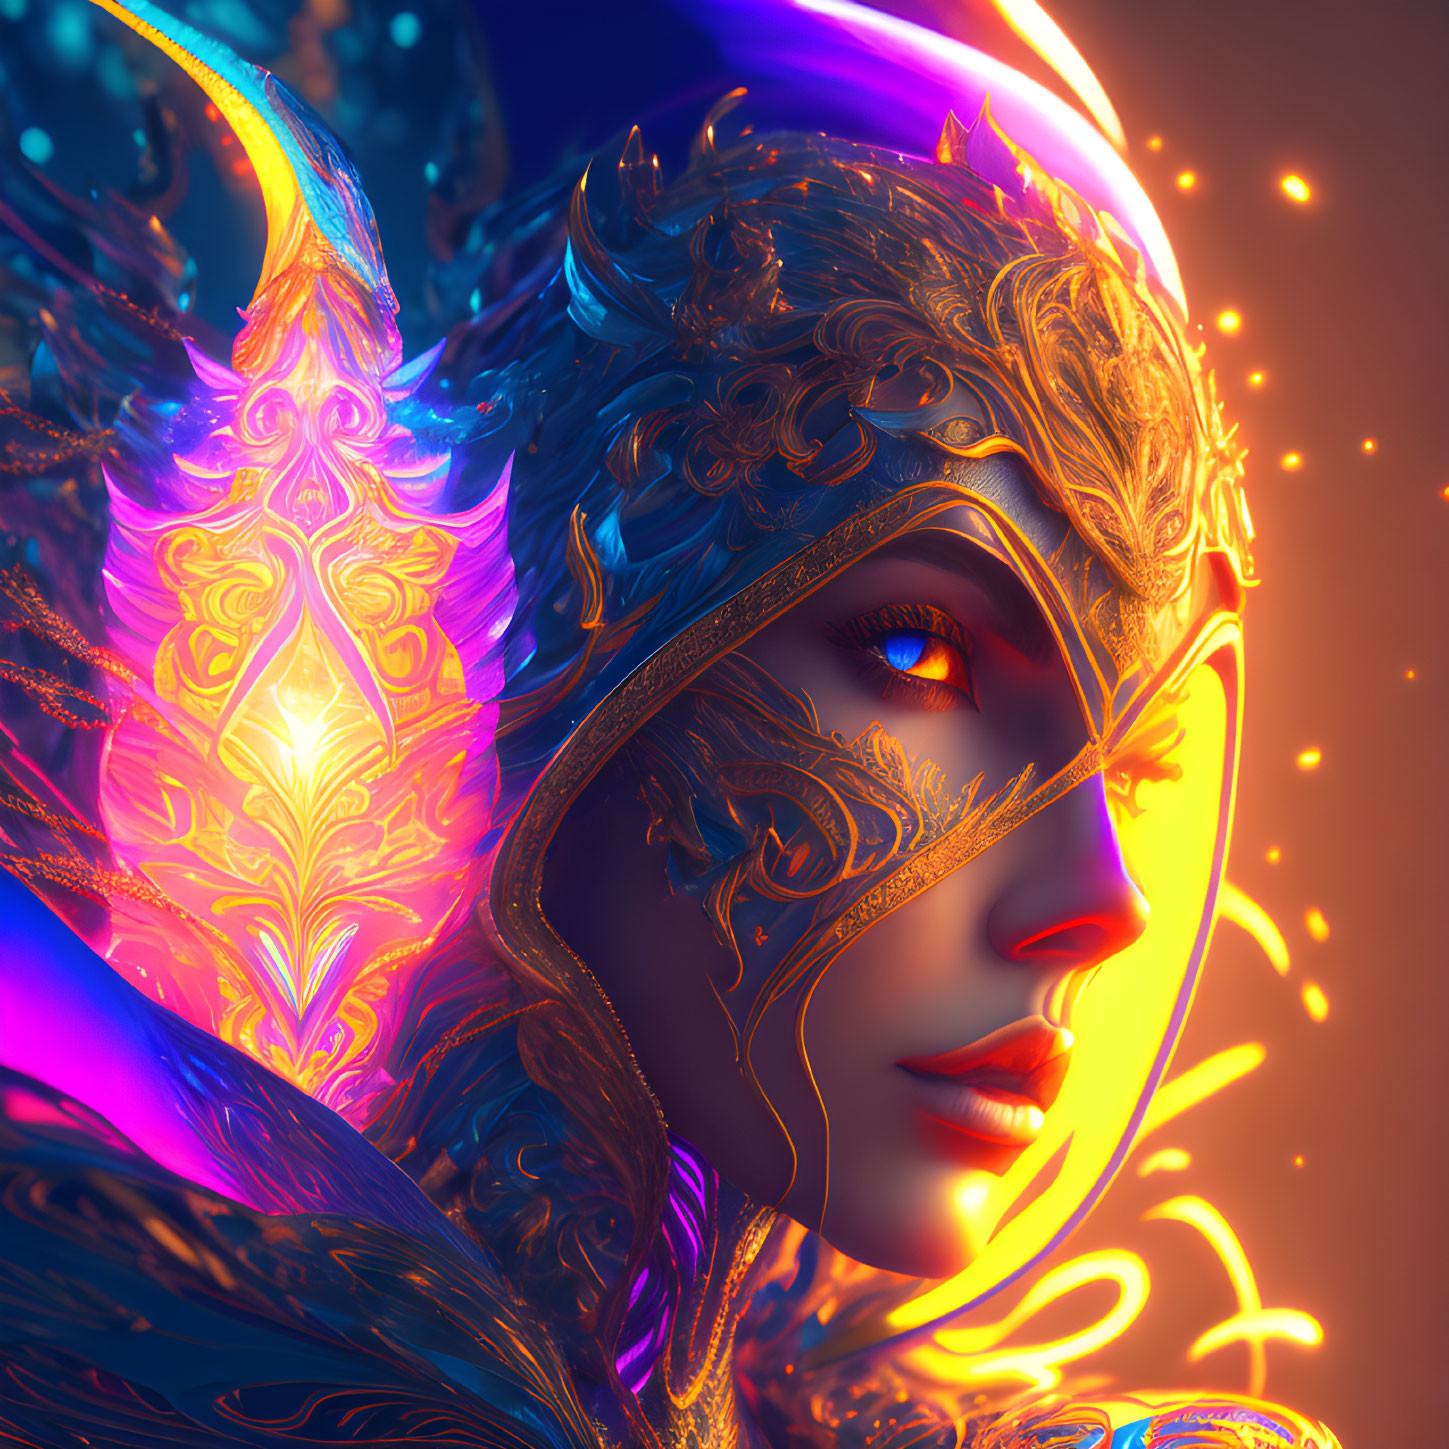 Detailed Digital Art: Character in Glowing Blue and Orange Armor